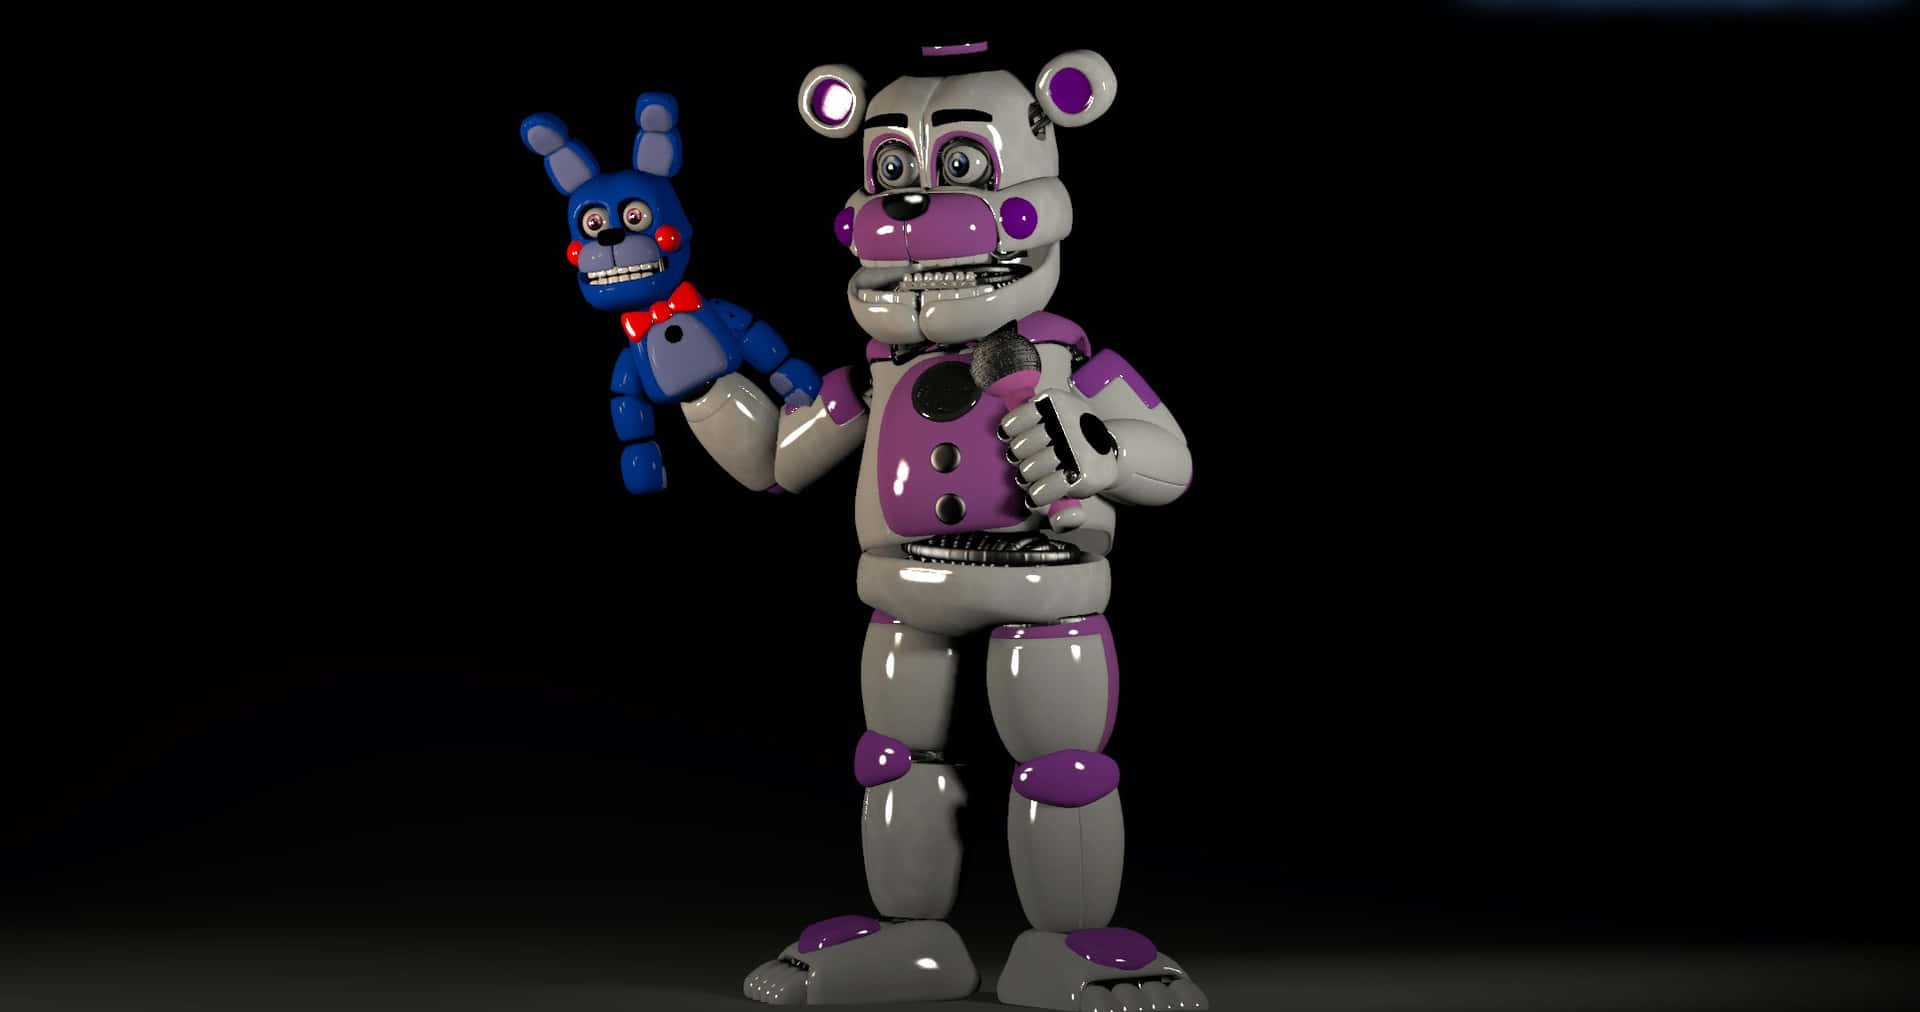 Funtime Freddy at Center Stage Wallpaper